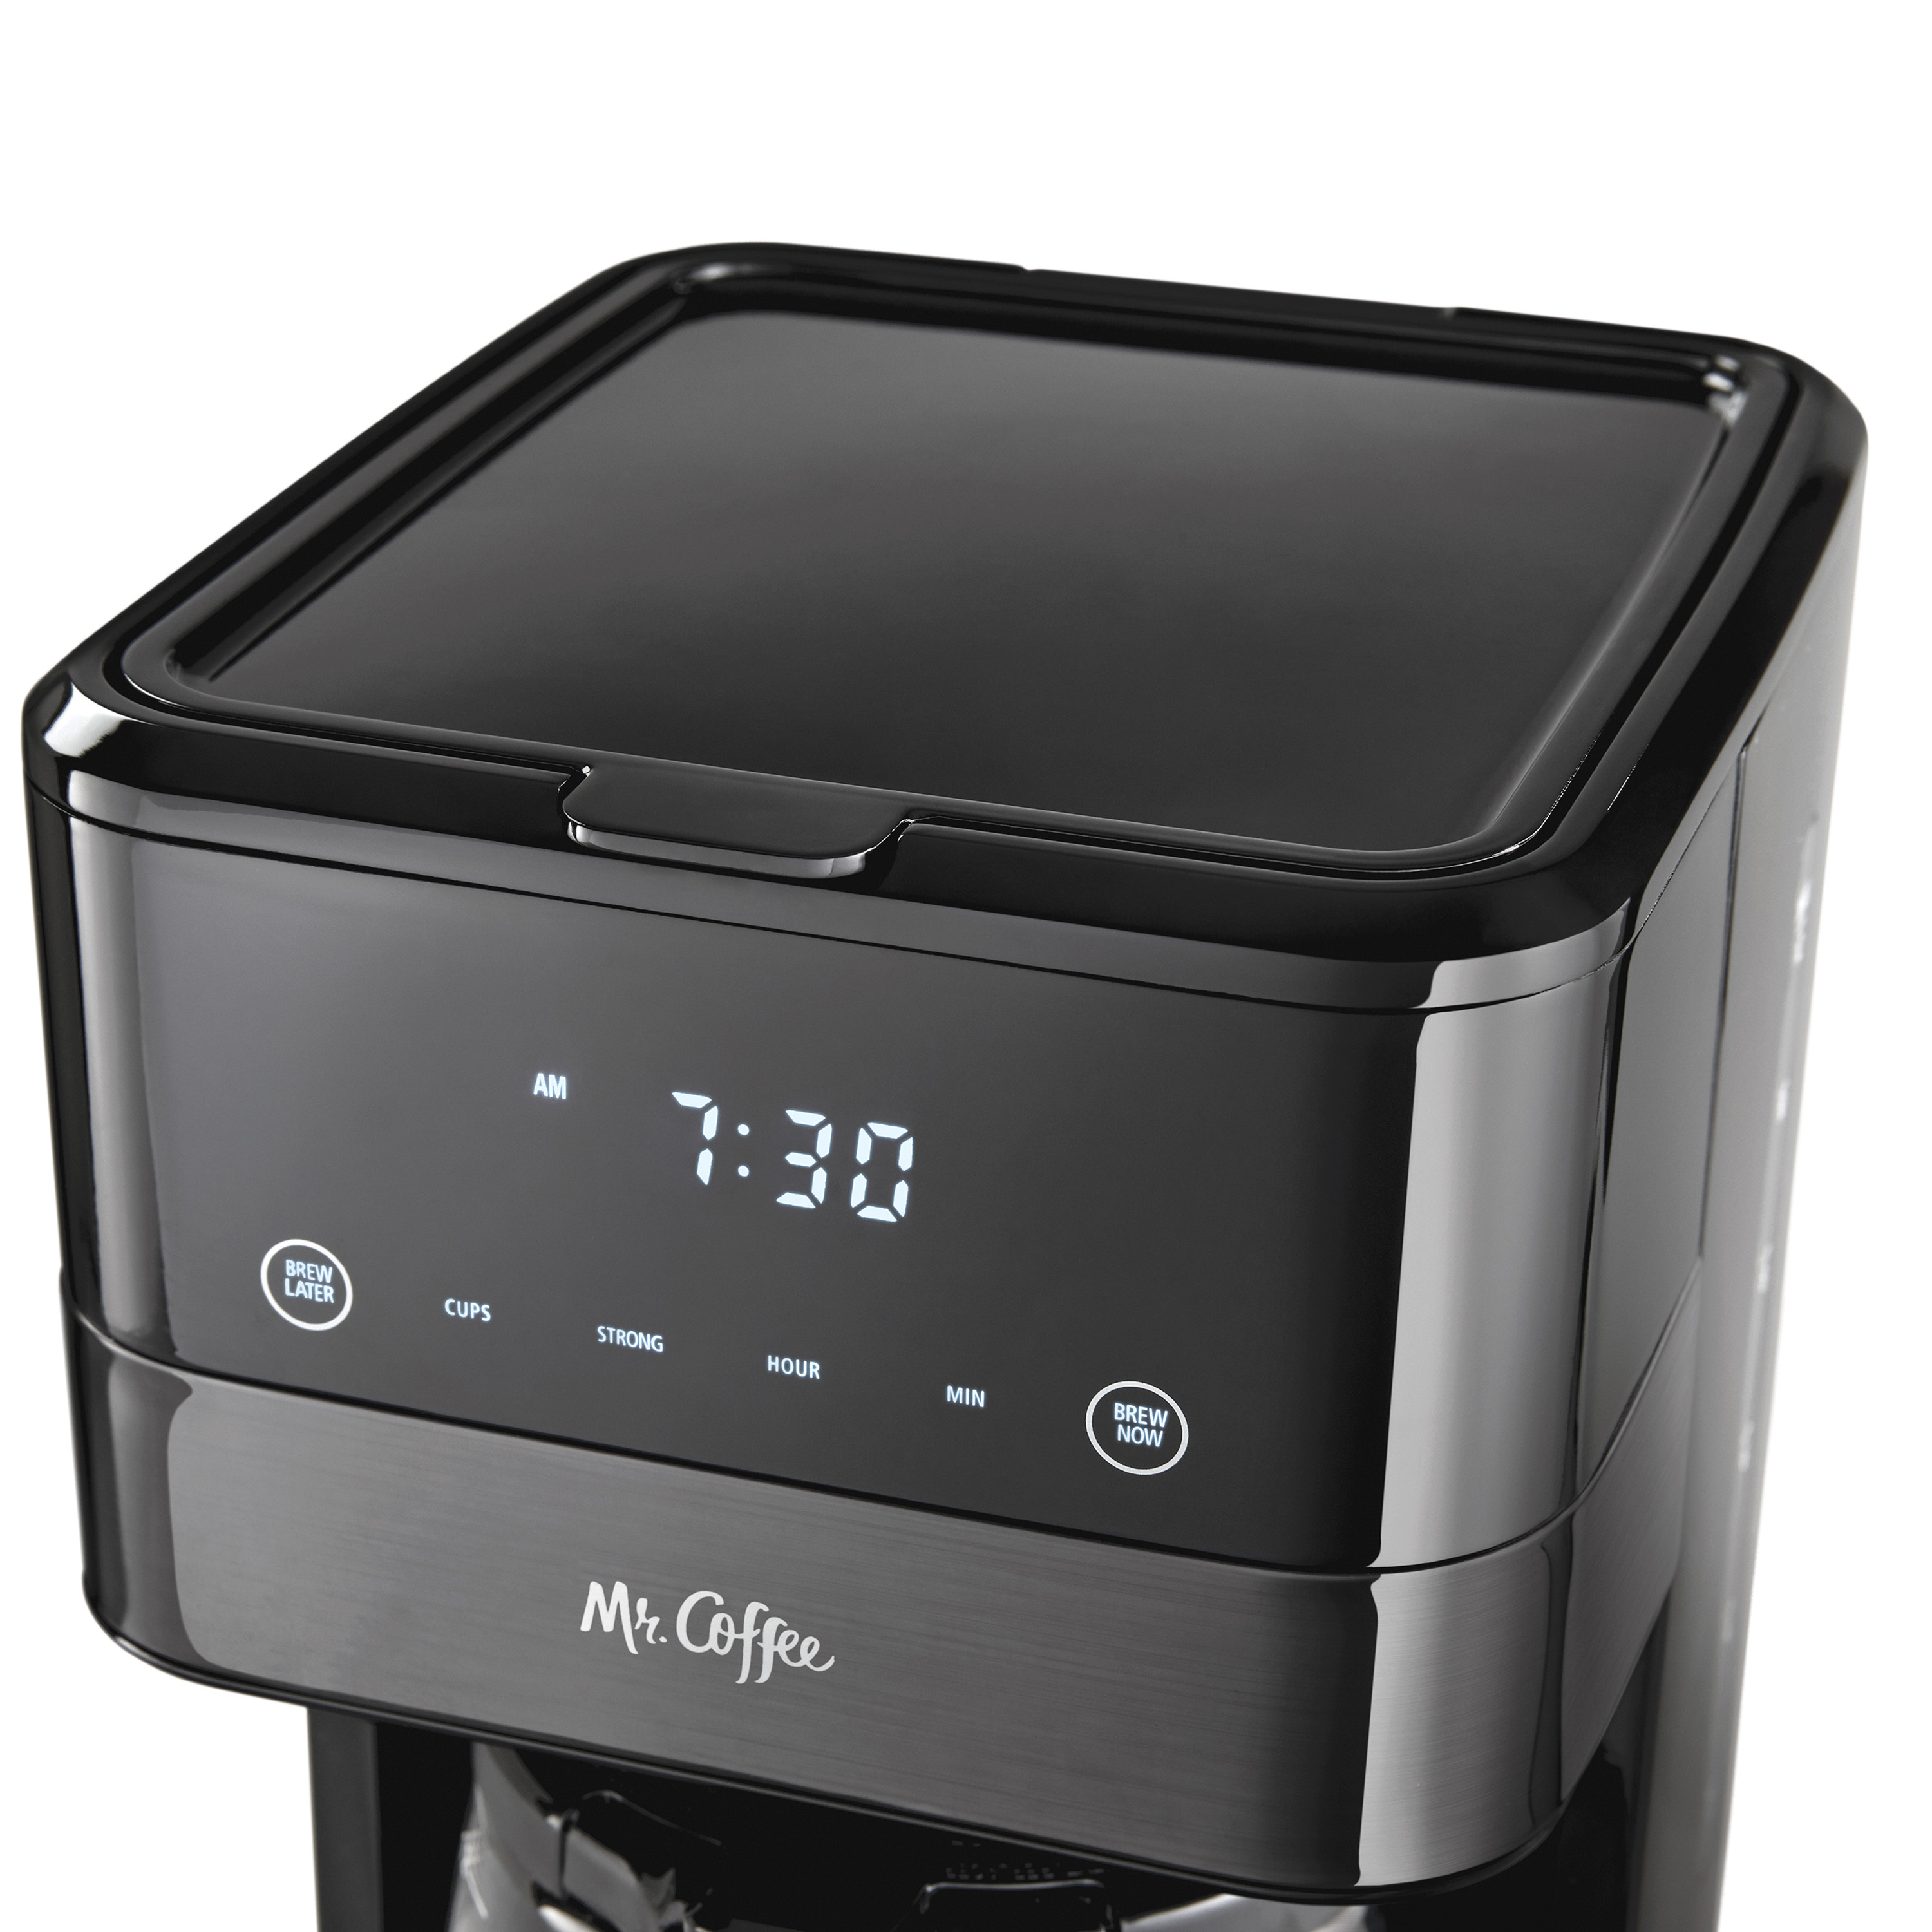 Mr. Coffee 12 Cup Programmable Coffee Maker, LED Touch Display, Black Stainless - image 4 of 9